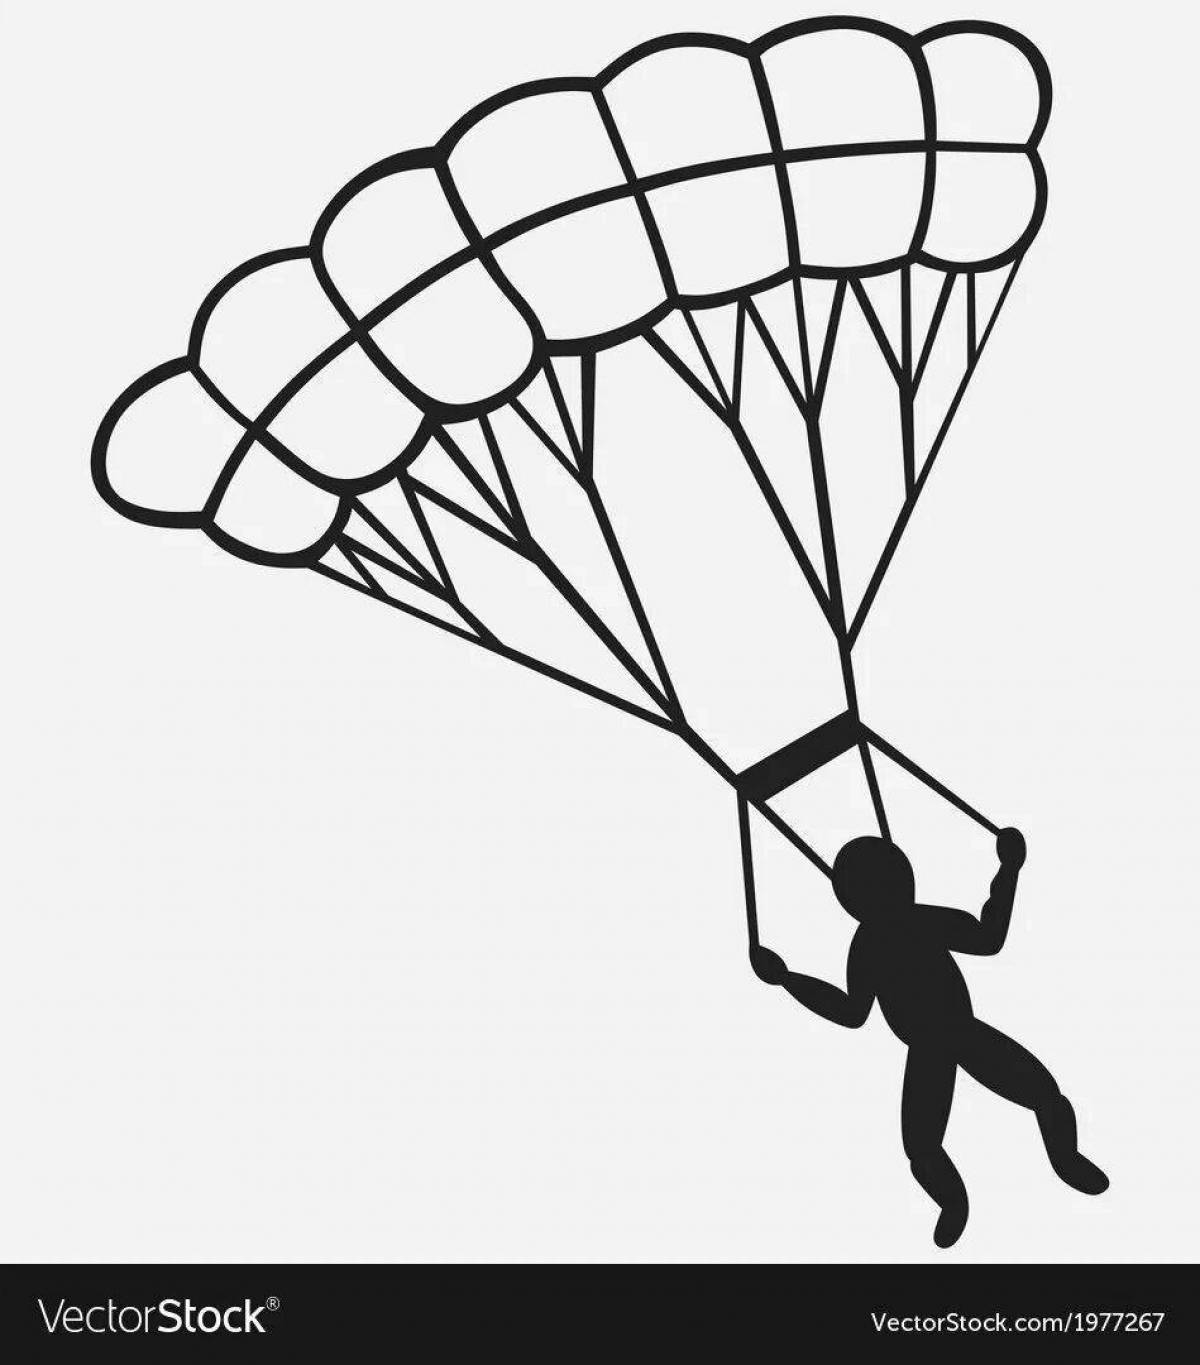 Animated military paratrooper coloring book for kids